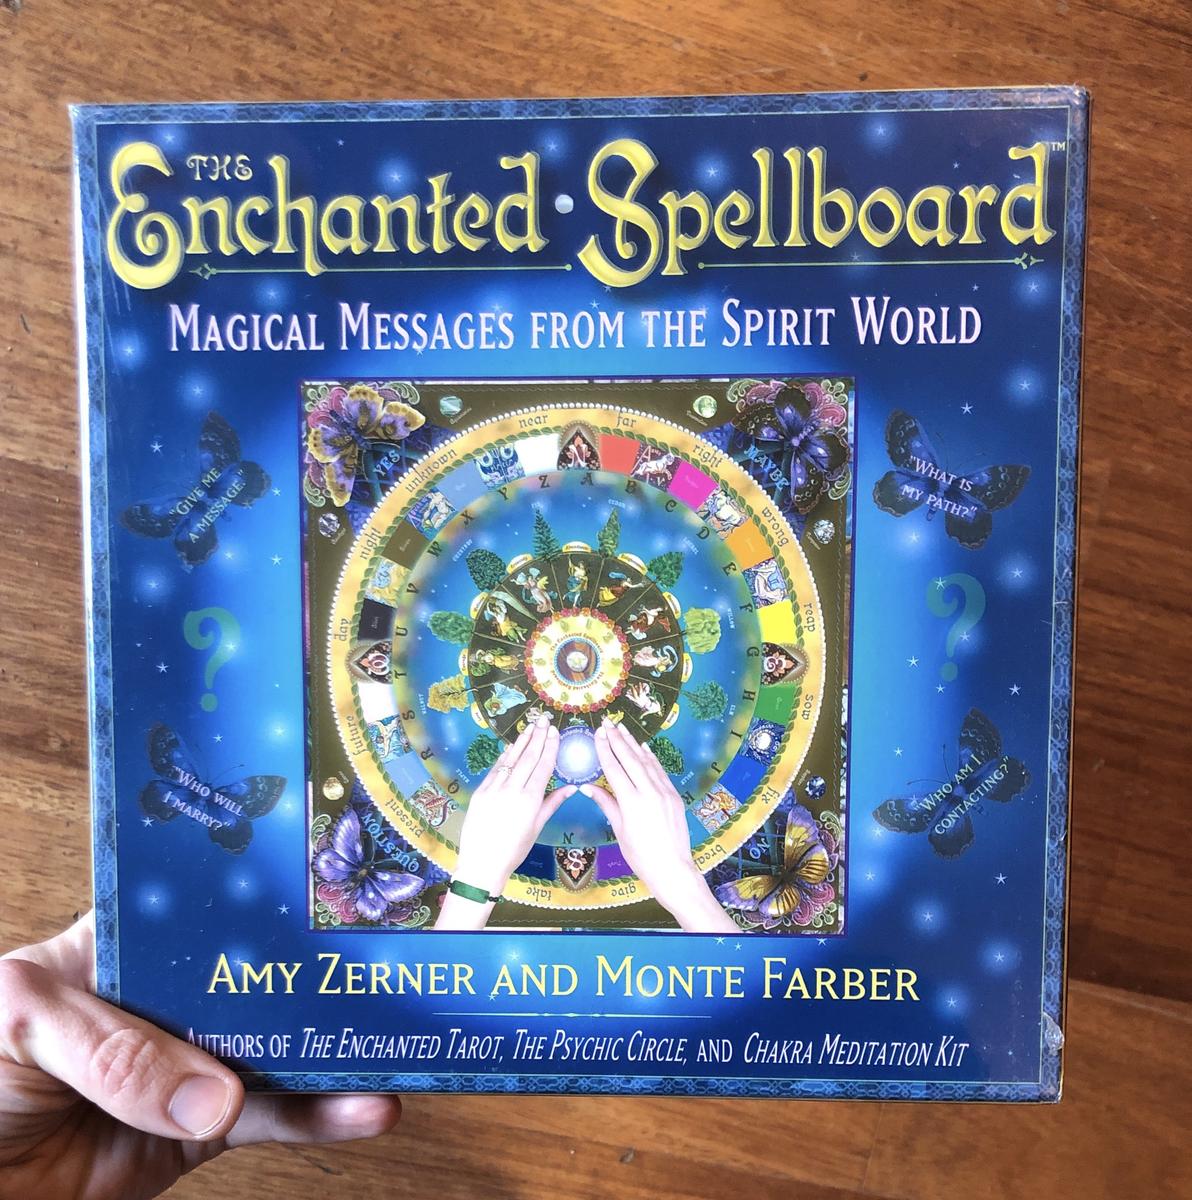 about the enchanted spellboard